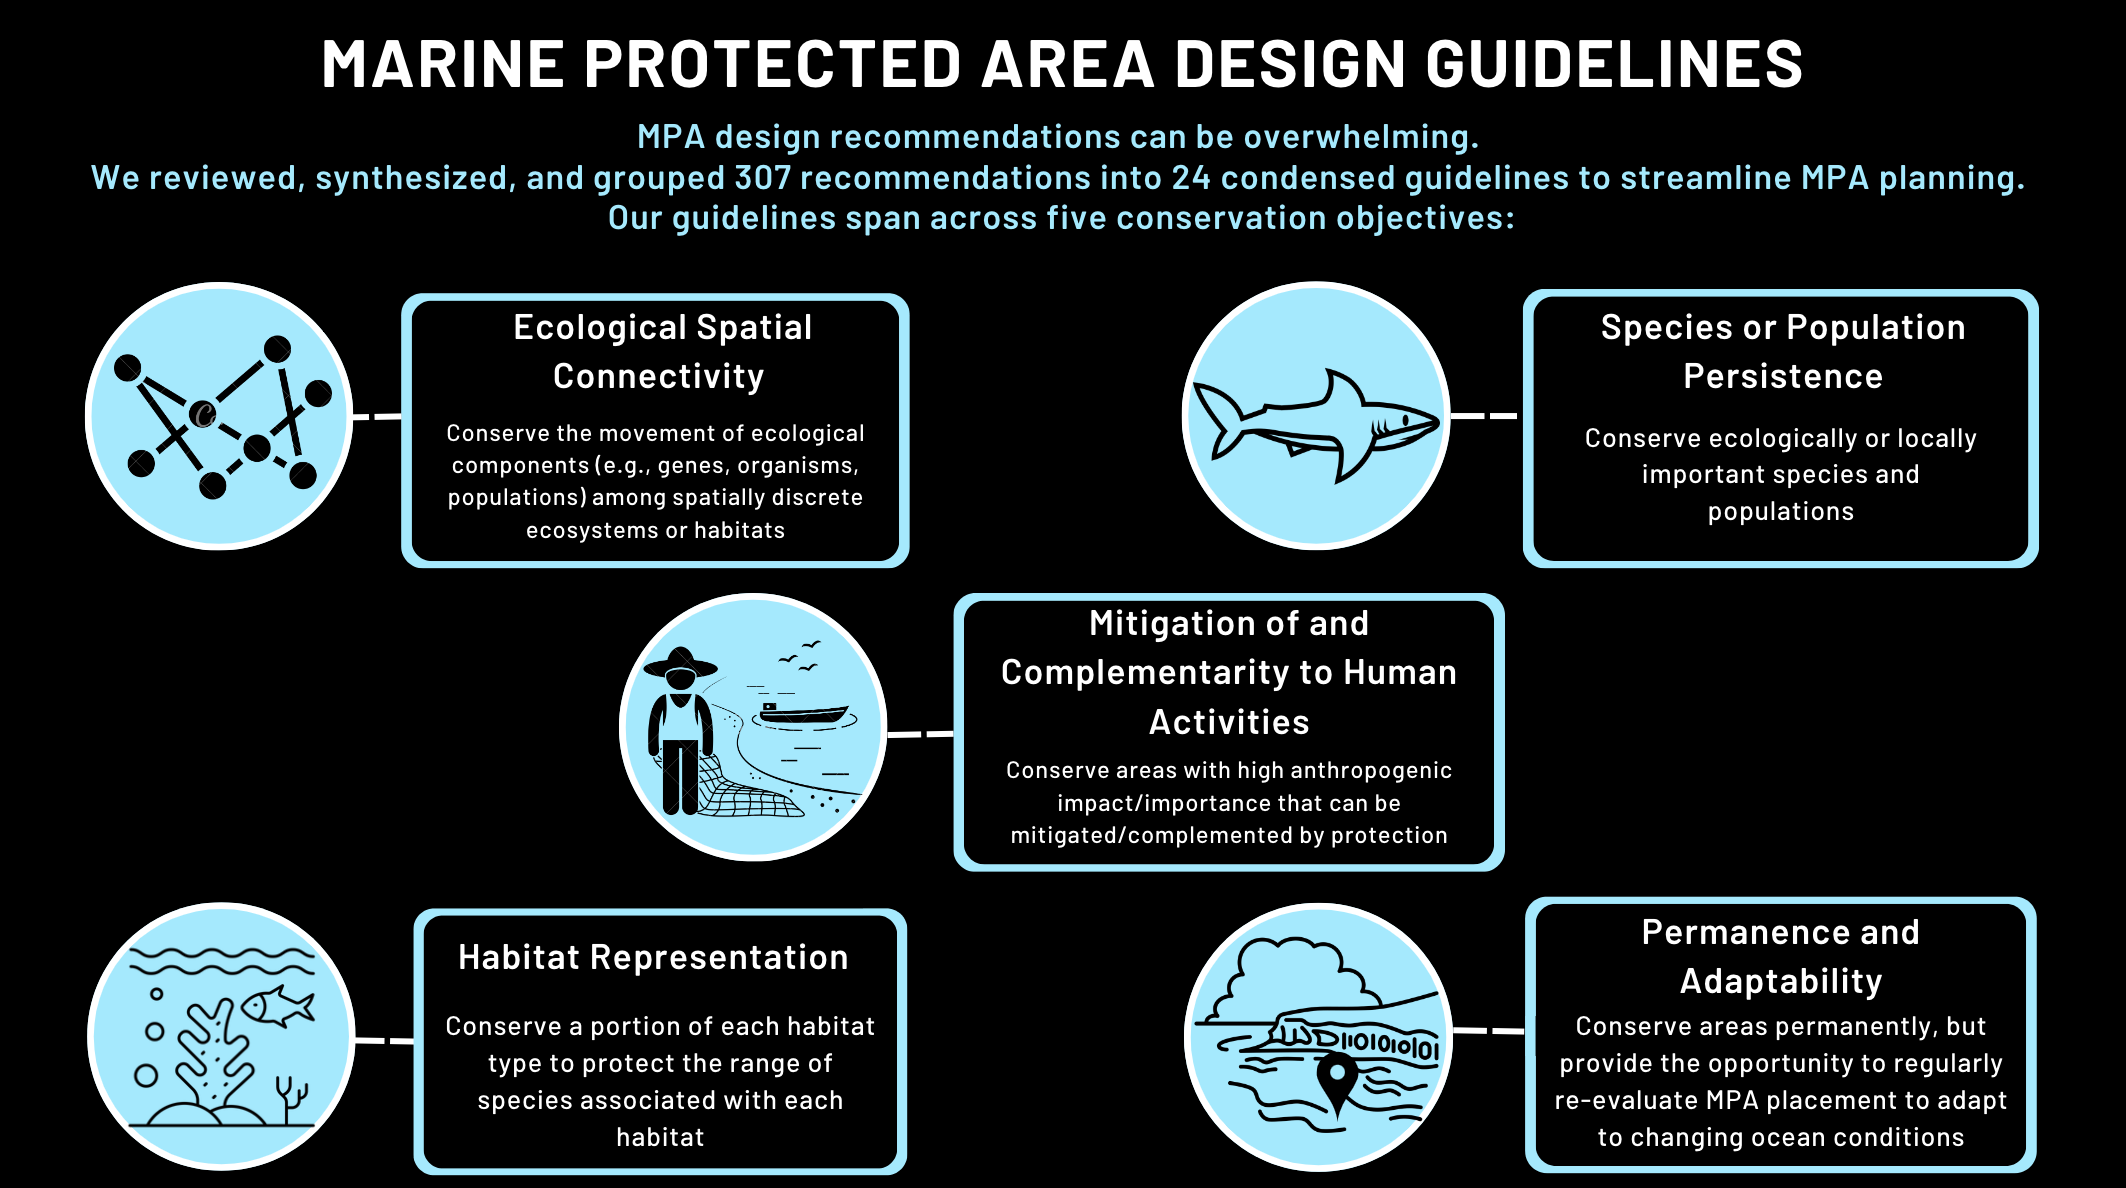 infographic of the 5 conservation objectives the MPA guidelines are grouped under